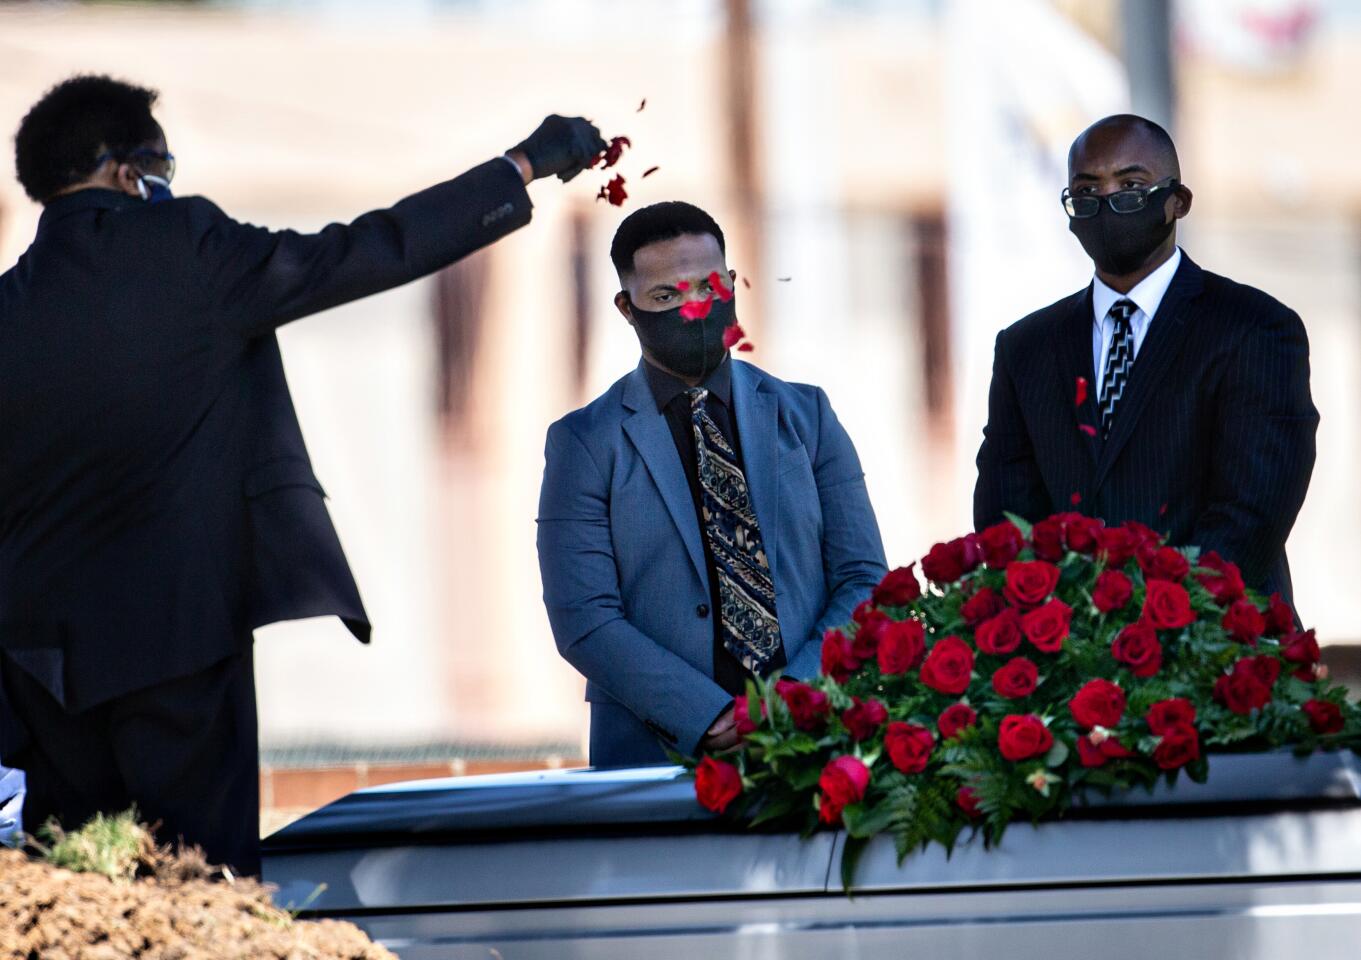 LOS ANGELES, CA - APRIL 15: James Plummer, Funeral Director at Angelus Funeral Home sprinkles rose petals over the casket as Nicholas Jackson (son of the deceased) (second from right) mourns his his father Charles Jackson Jr., who died from Covid-19 during the coronavirus pandemic at the Inglewood Park Cemetery on Wednesday, April 15, 2020 in Los Angeles, CA. Jackson attended the Black Summit of the National Brotherhood of Skiers annual ski trip in late February, early March. Upon his return home he fell ill and died. (Jason Armond / Los Angeles Times)